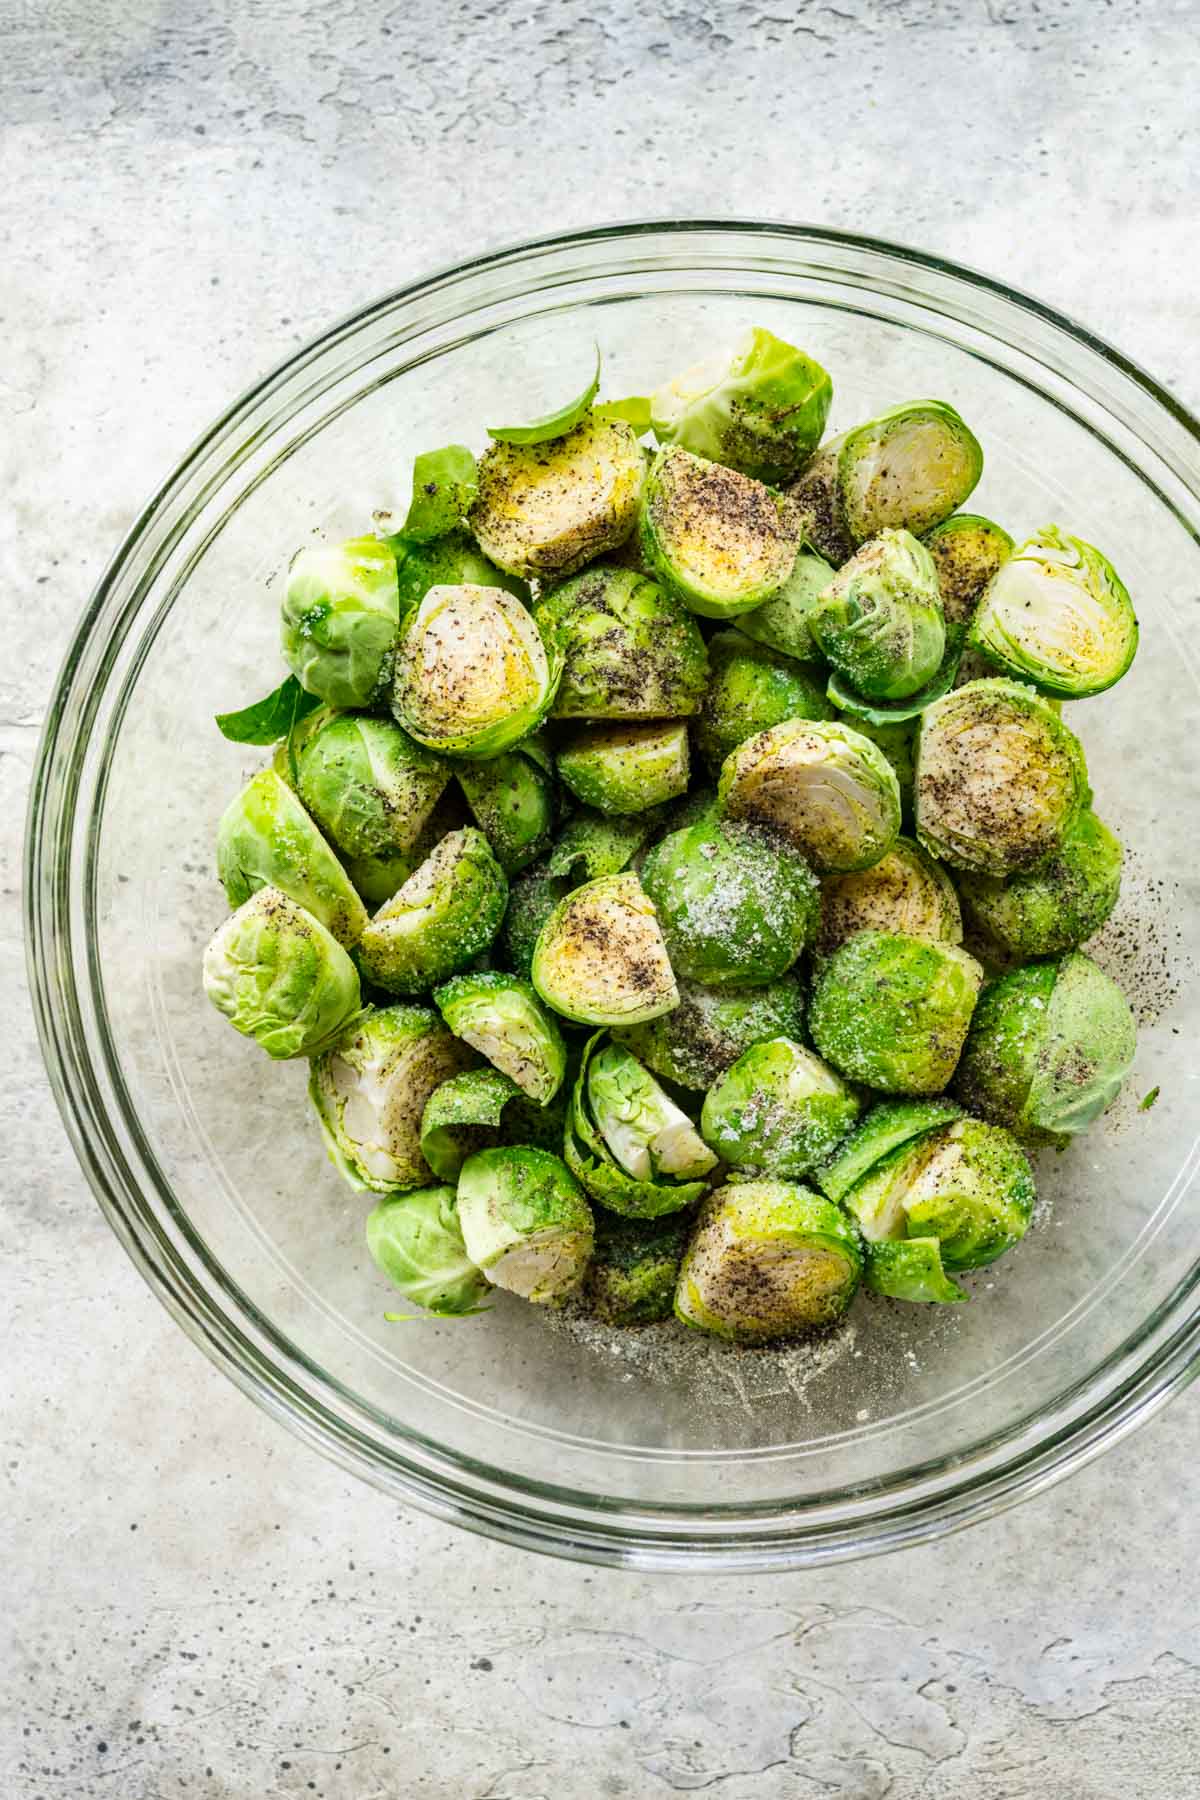 Roasted Balsamic Brussels Sprouts being tossed in oil and seasoning